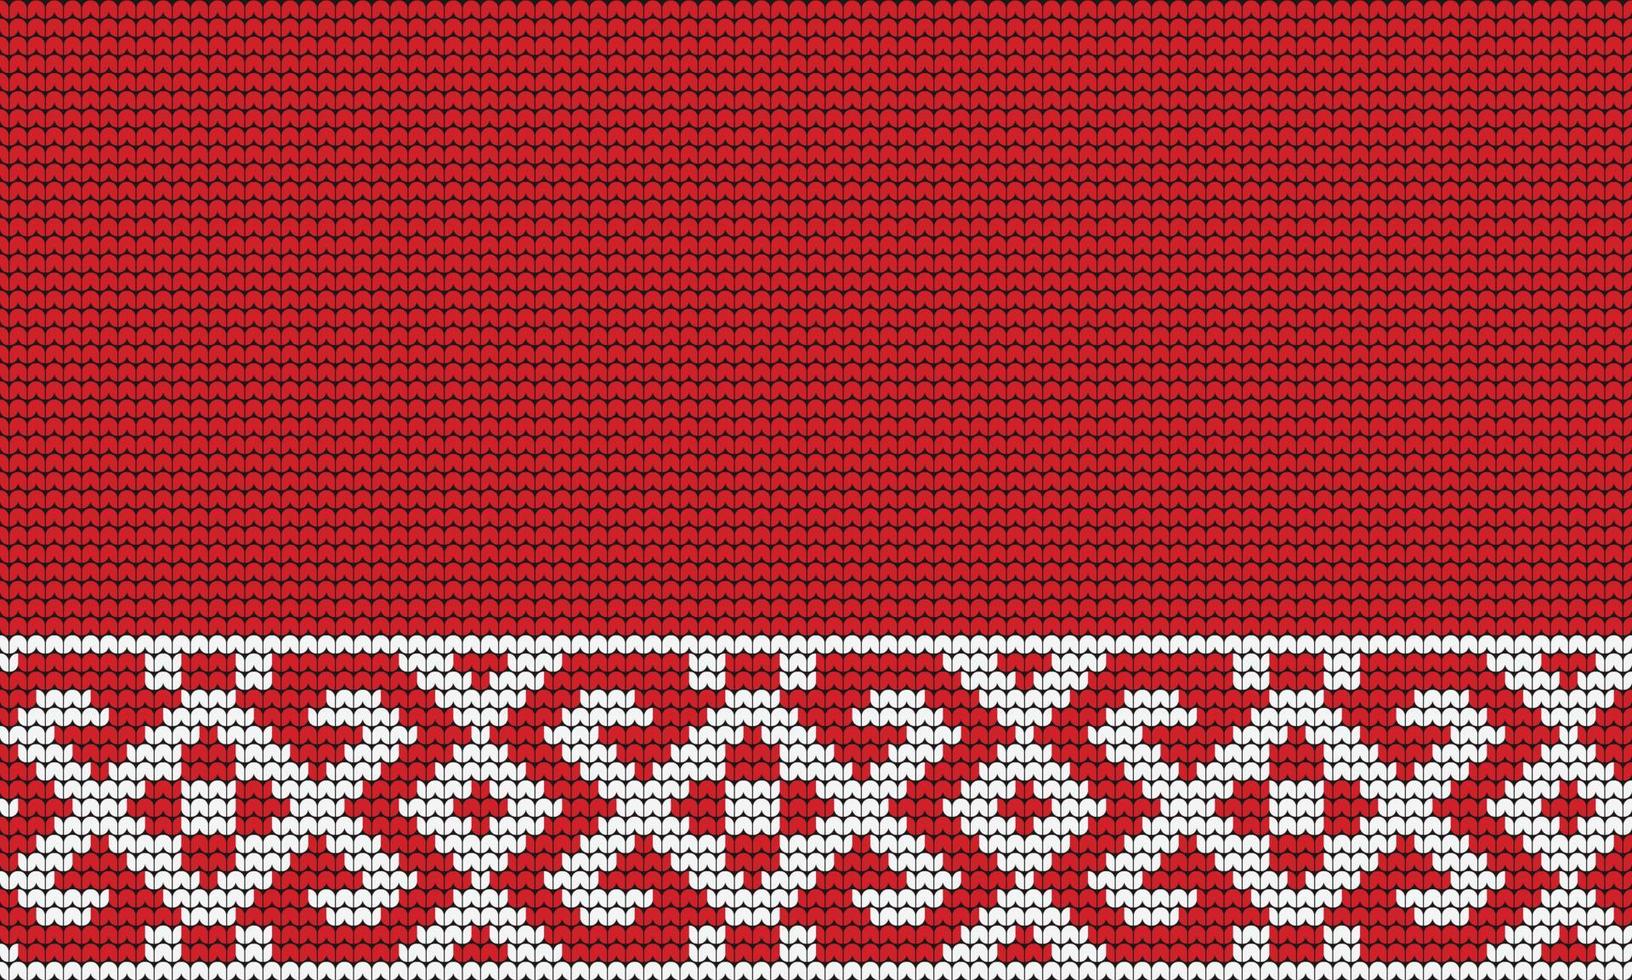 Knitting Seamless Pattern border on Red Background, Knitting  Ethnic Pattern Border Merry Christmas and happy winter days vector poste